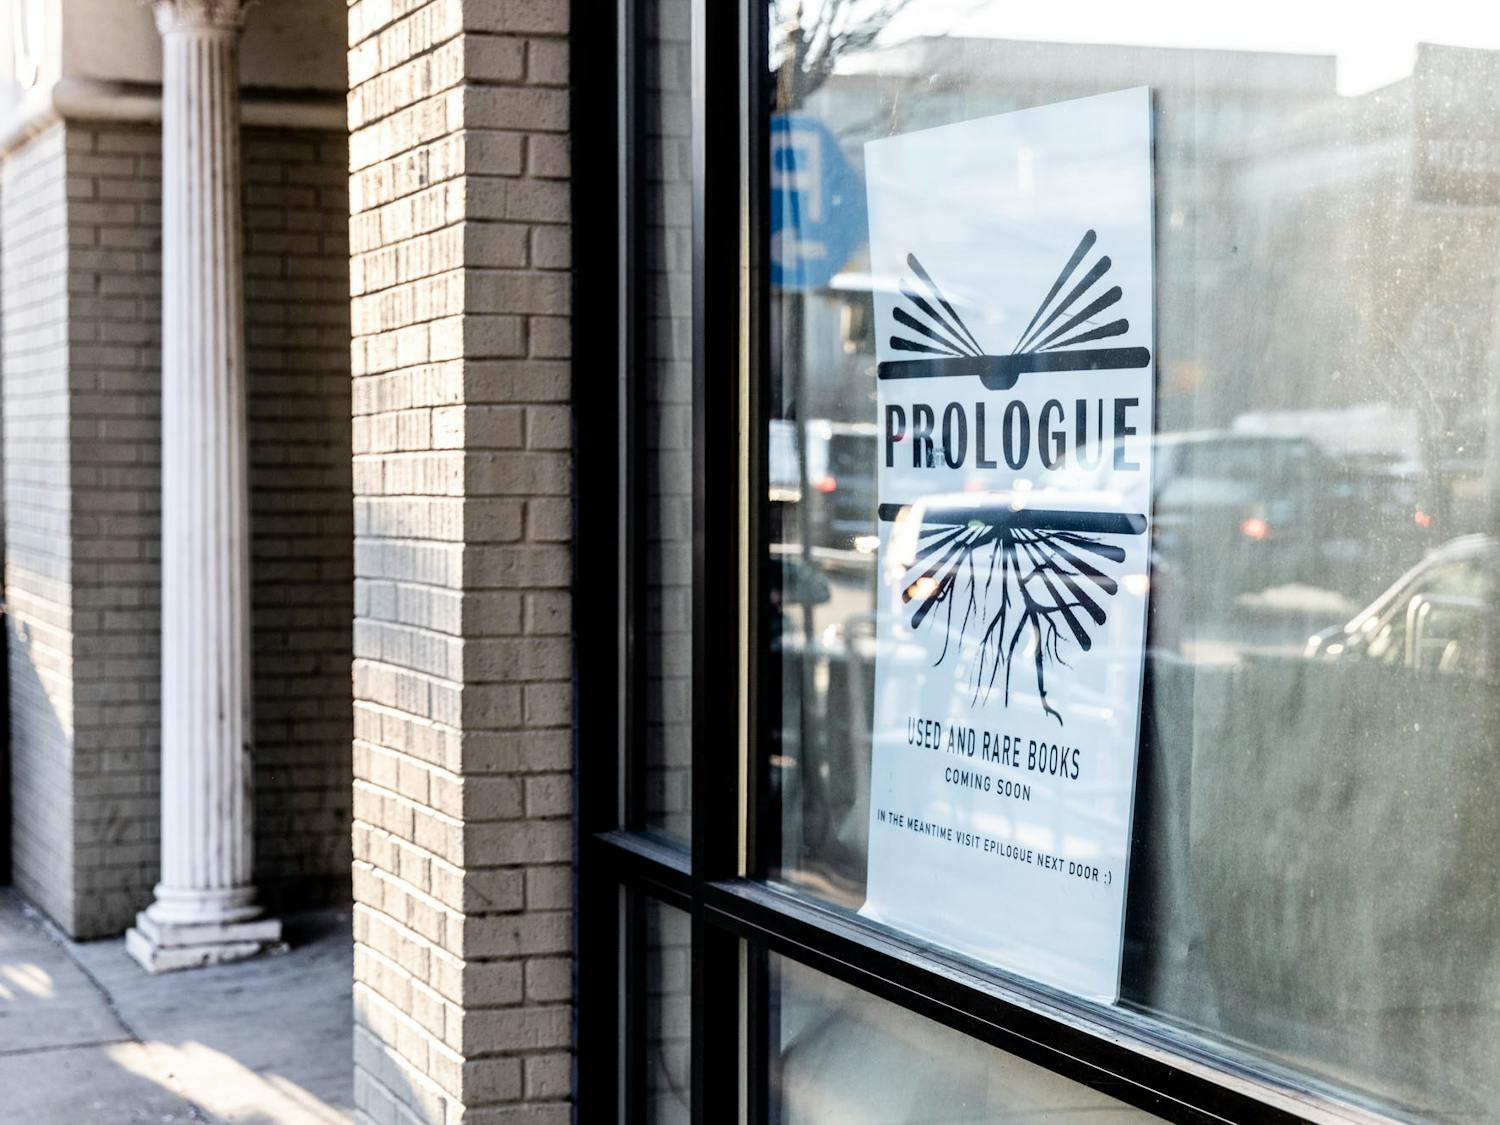 A "coming soon" sign stands in the window on Franklin St. where Prologue was set to reopen in 2021.